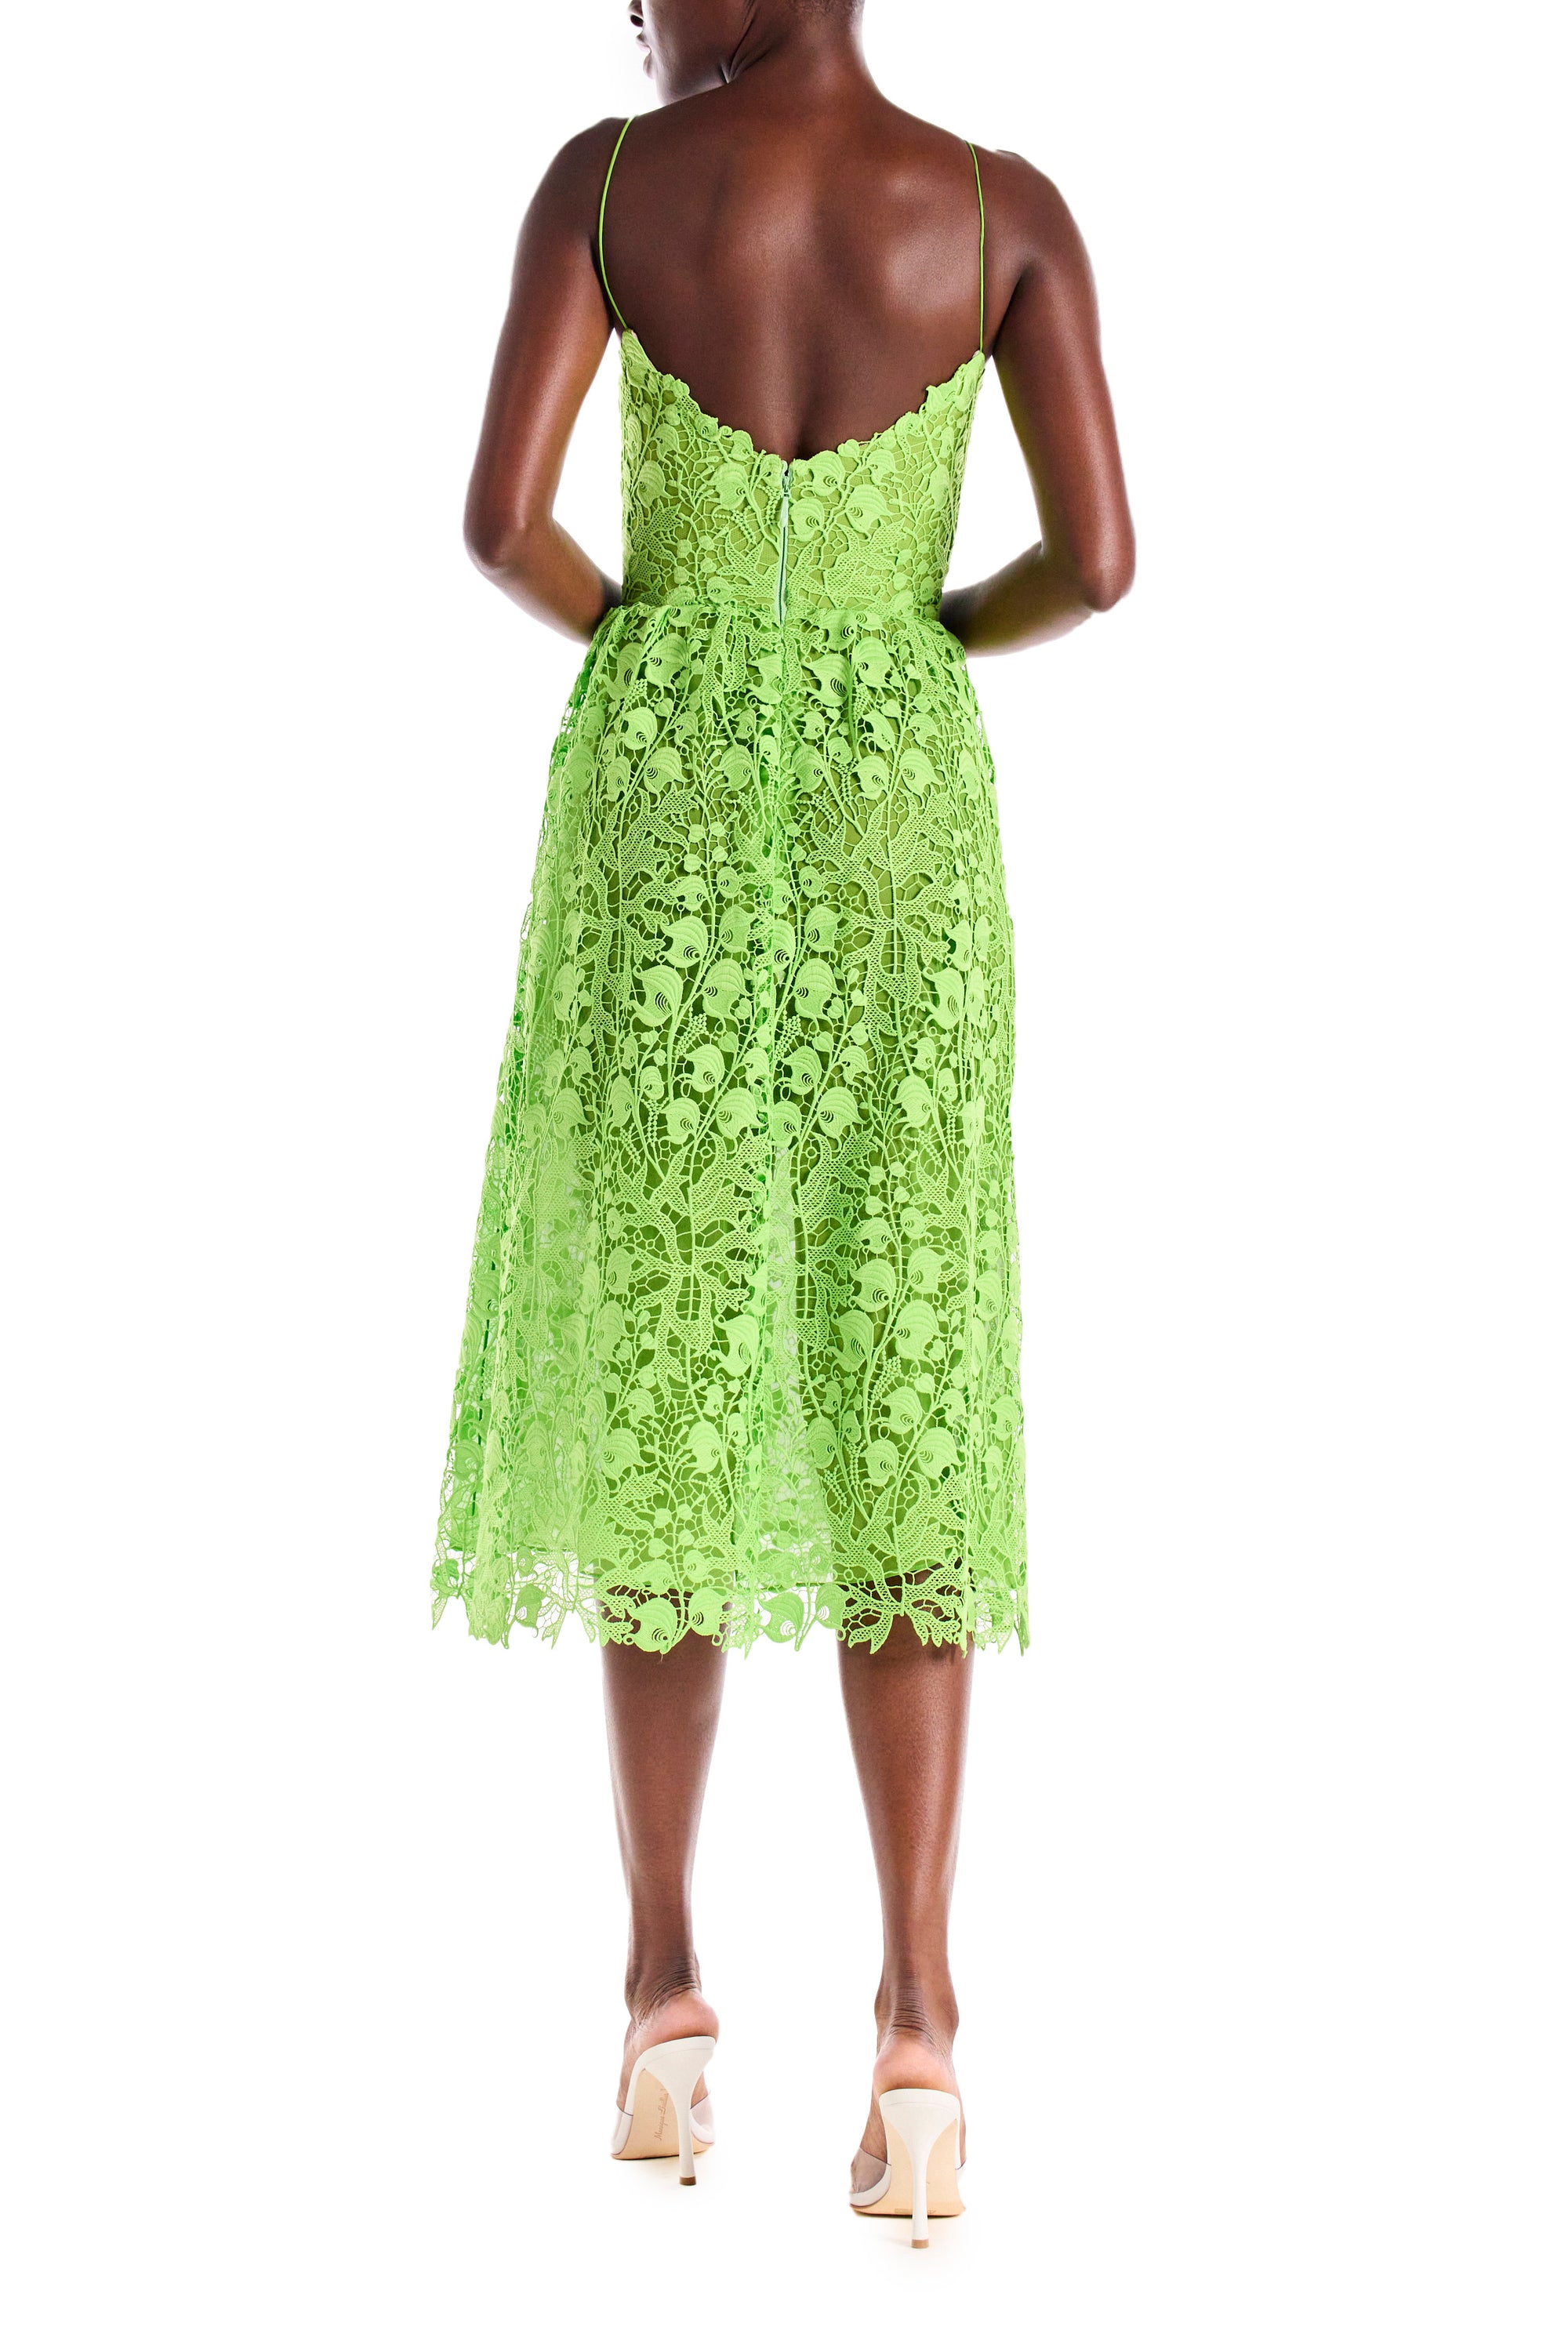 Lime green lace dress with spaghetti straps and midi length.